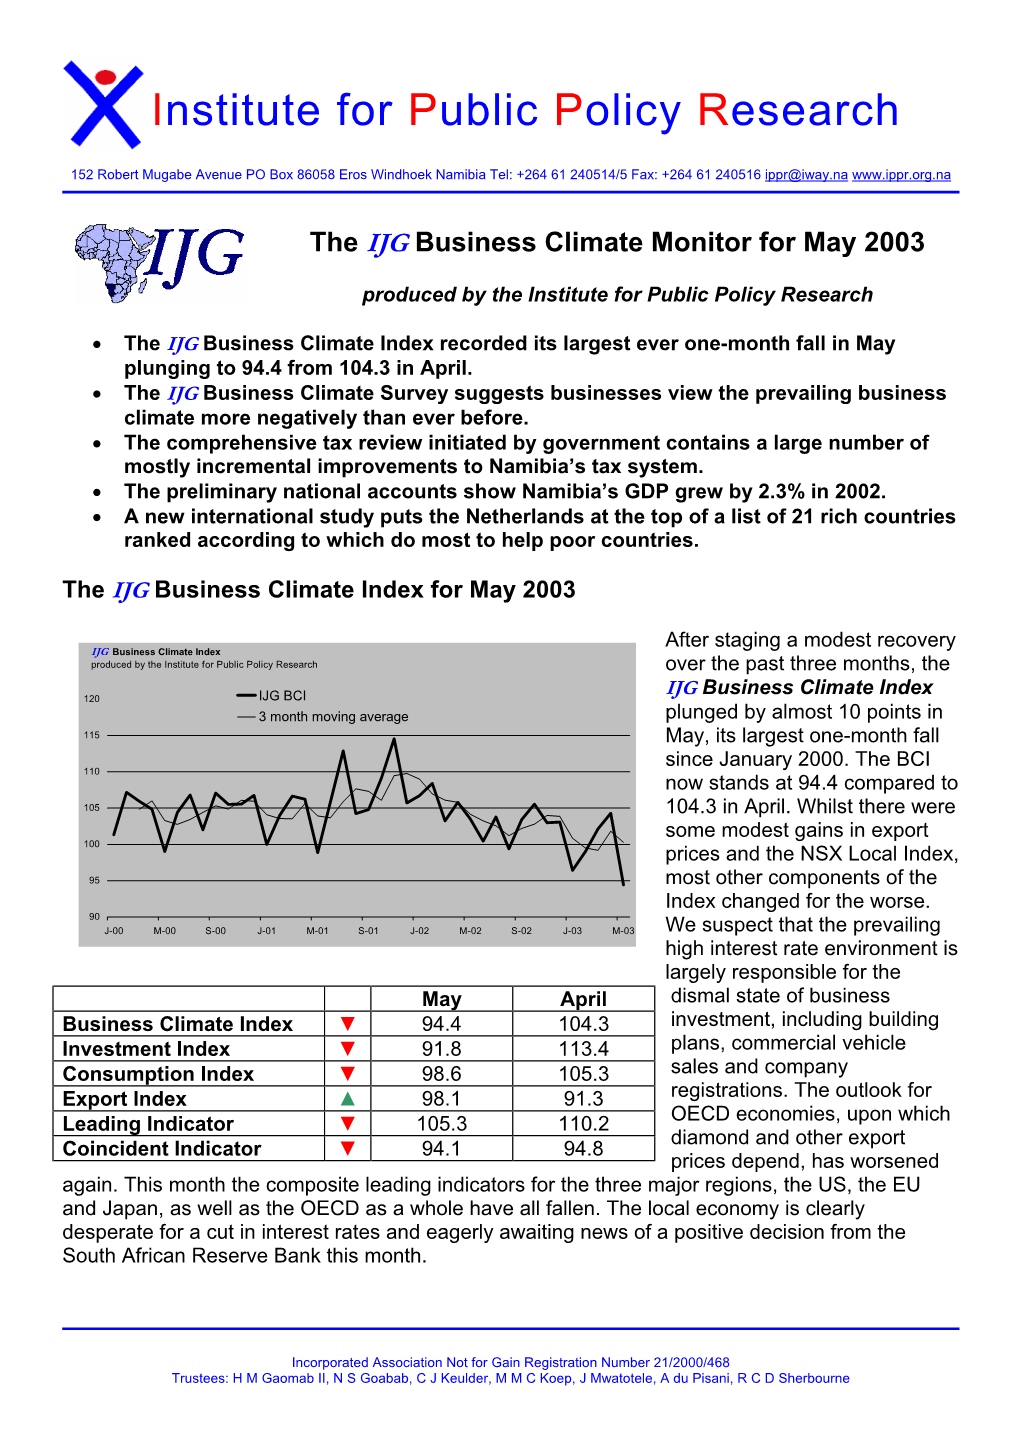 The IJG Business Climate Monitor for May 2003